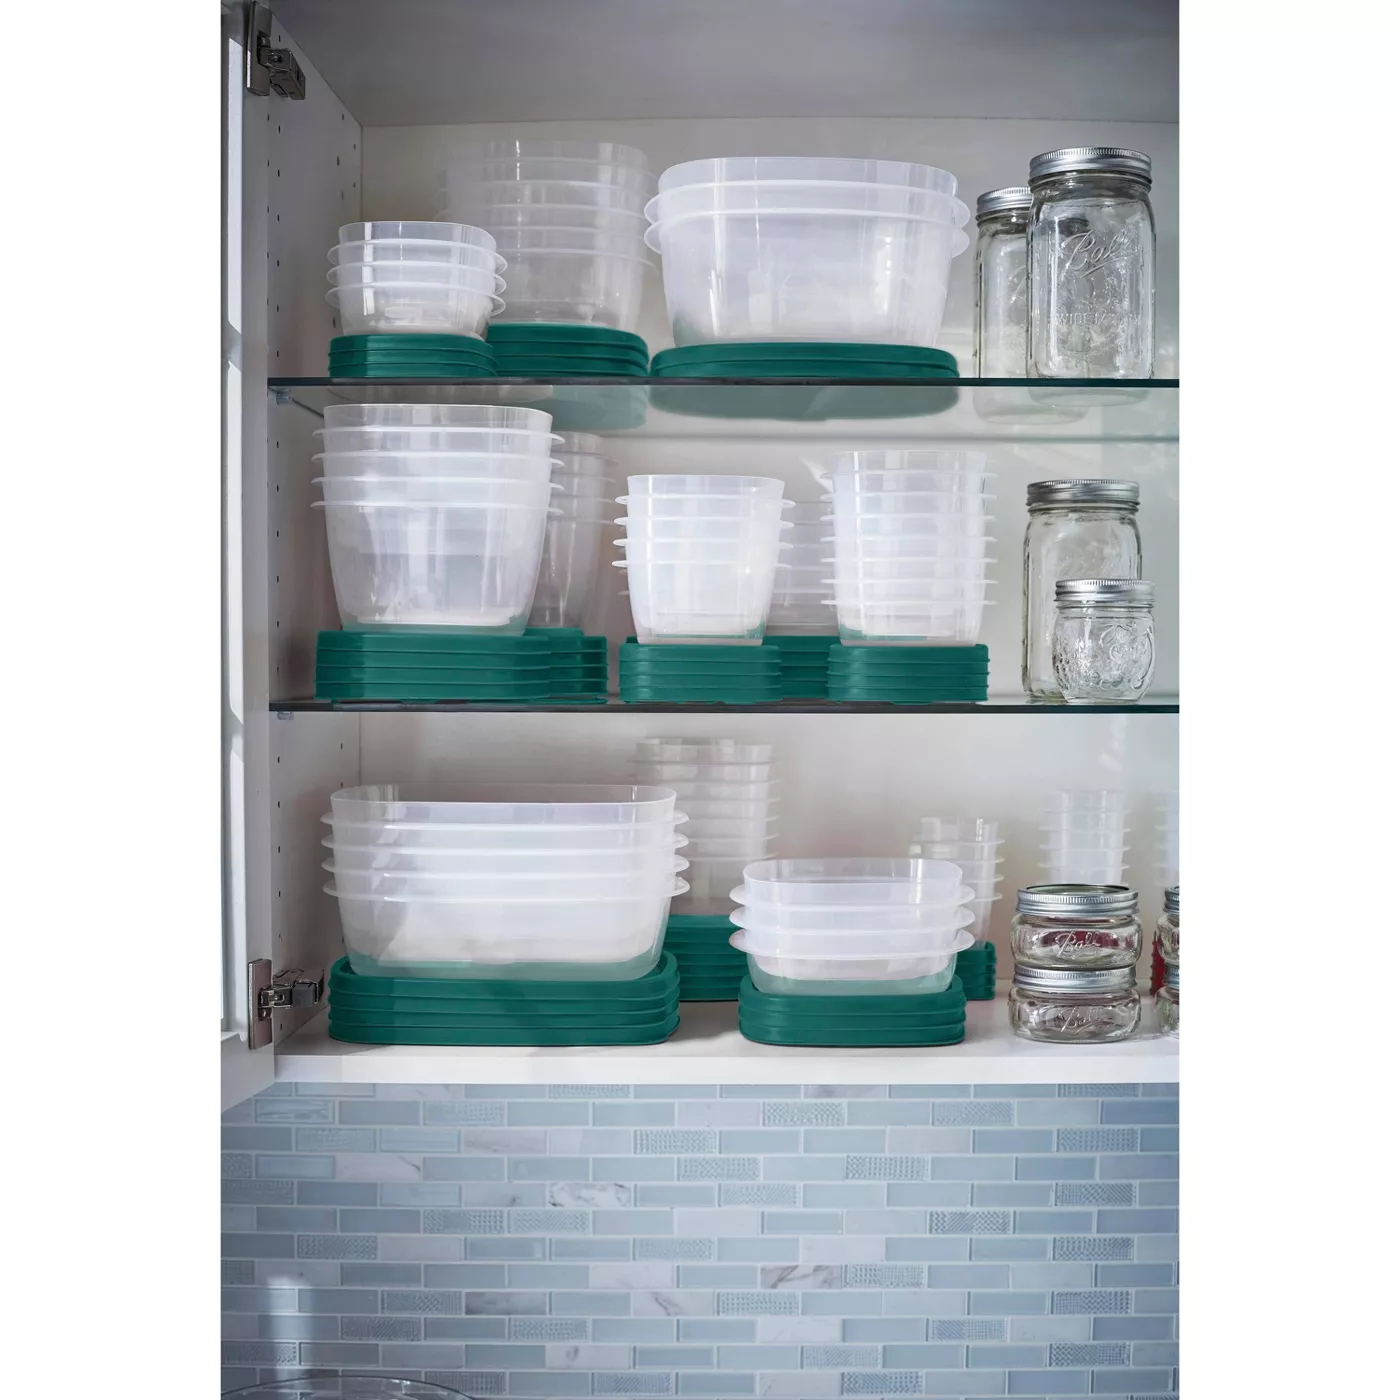 Rubbermaid 30pc Food Storage Container Set with Easy Find Lids Forest Green - image 4 of 9